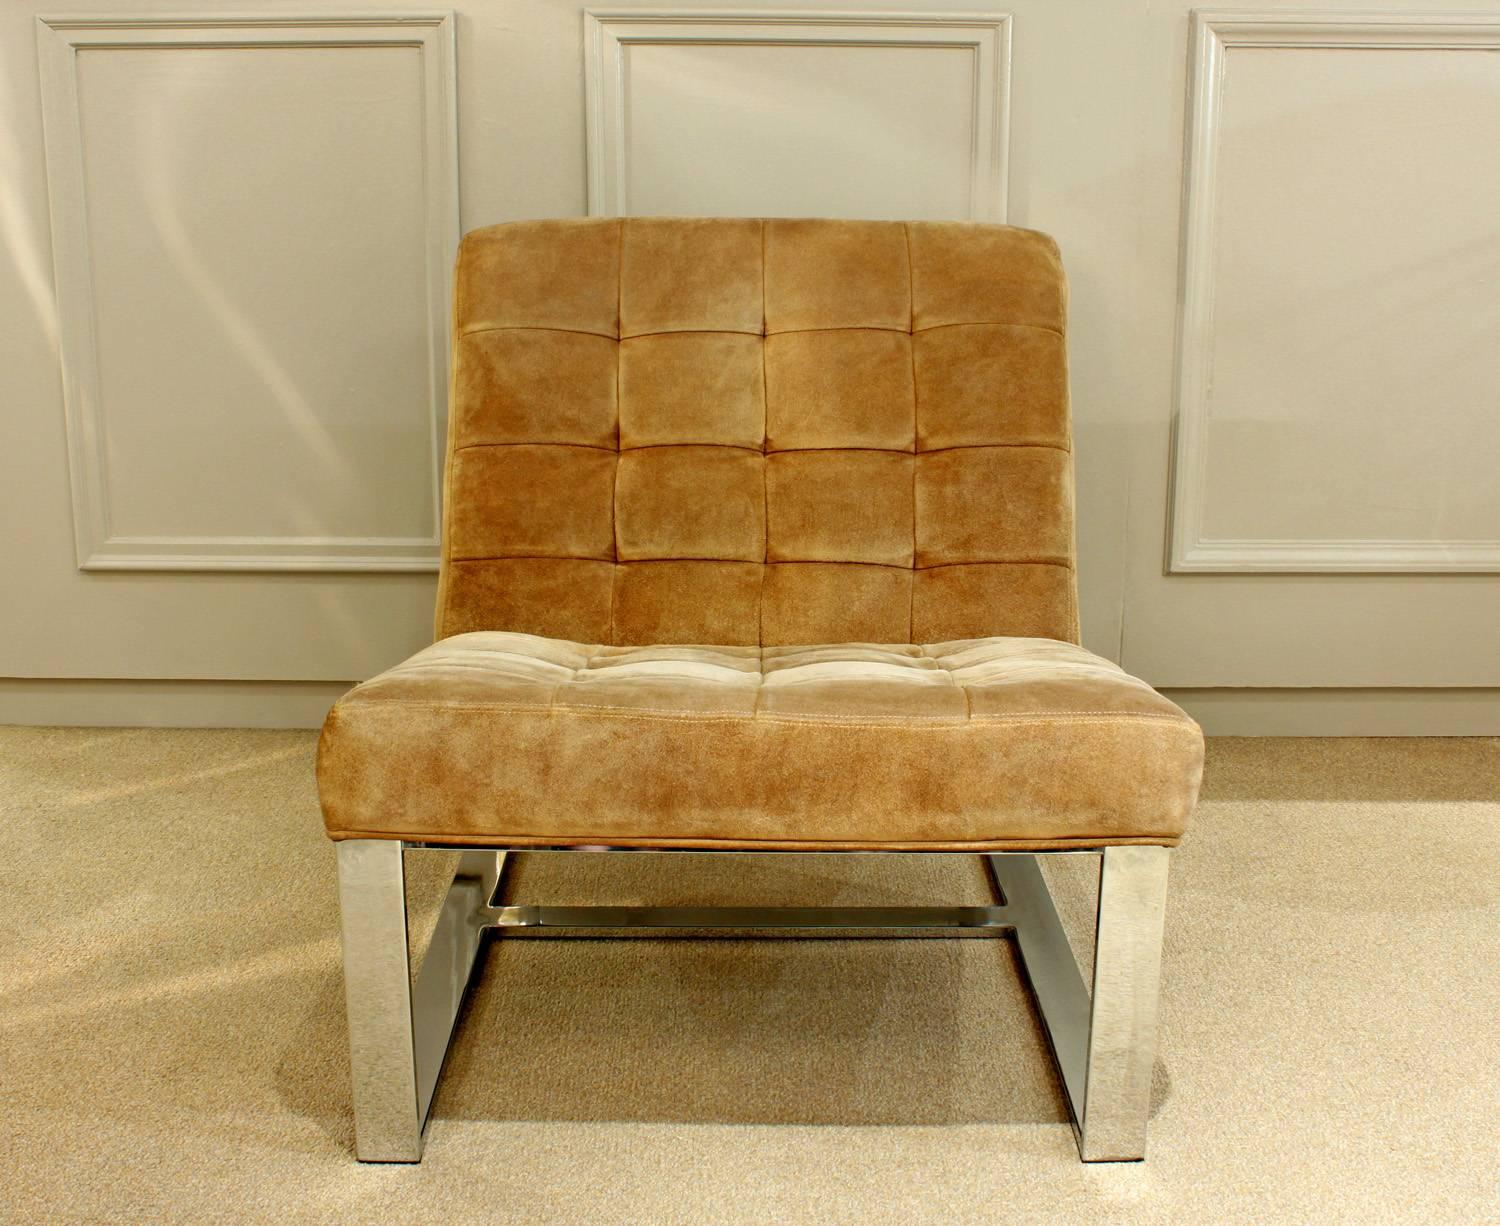 Pair of chic slipper chairs, tufted suede with chrome frames, by Milo Baughman for Thayer Coggin, American 1971 (original labels under chairs.) These are very sculptural and a great example of Baughman's design skill.